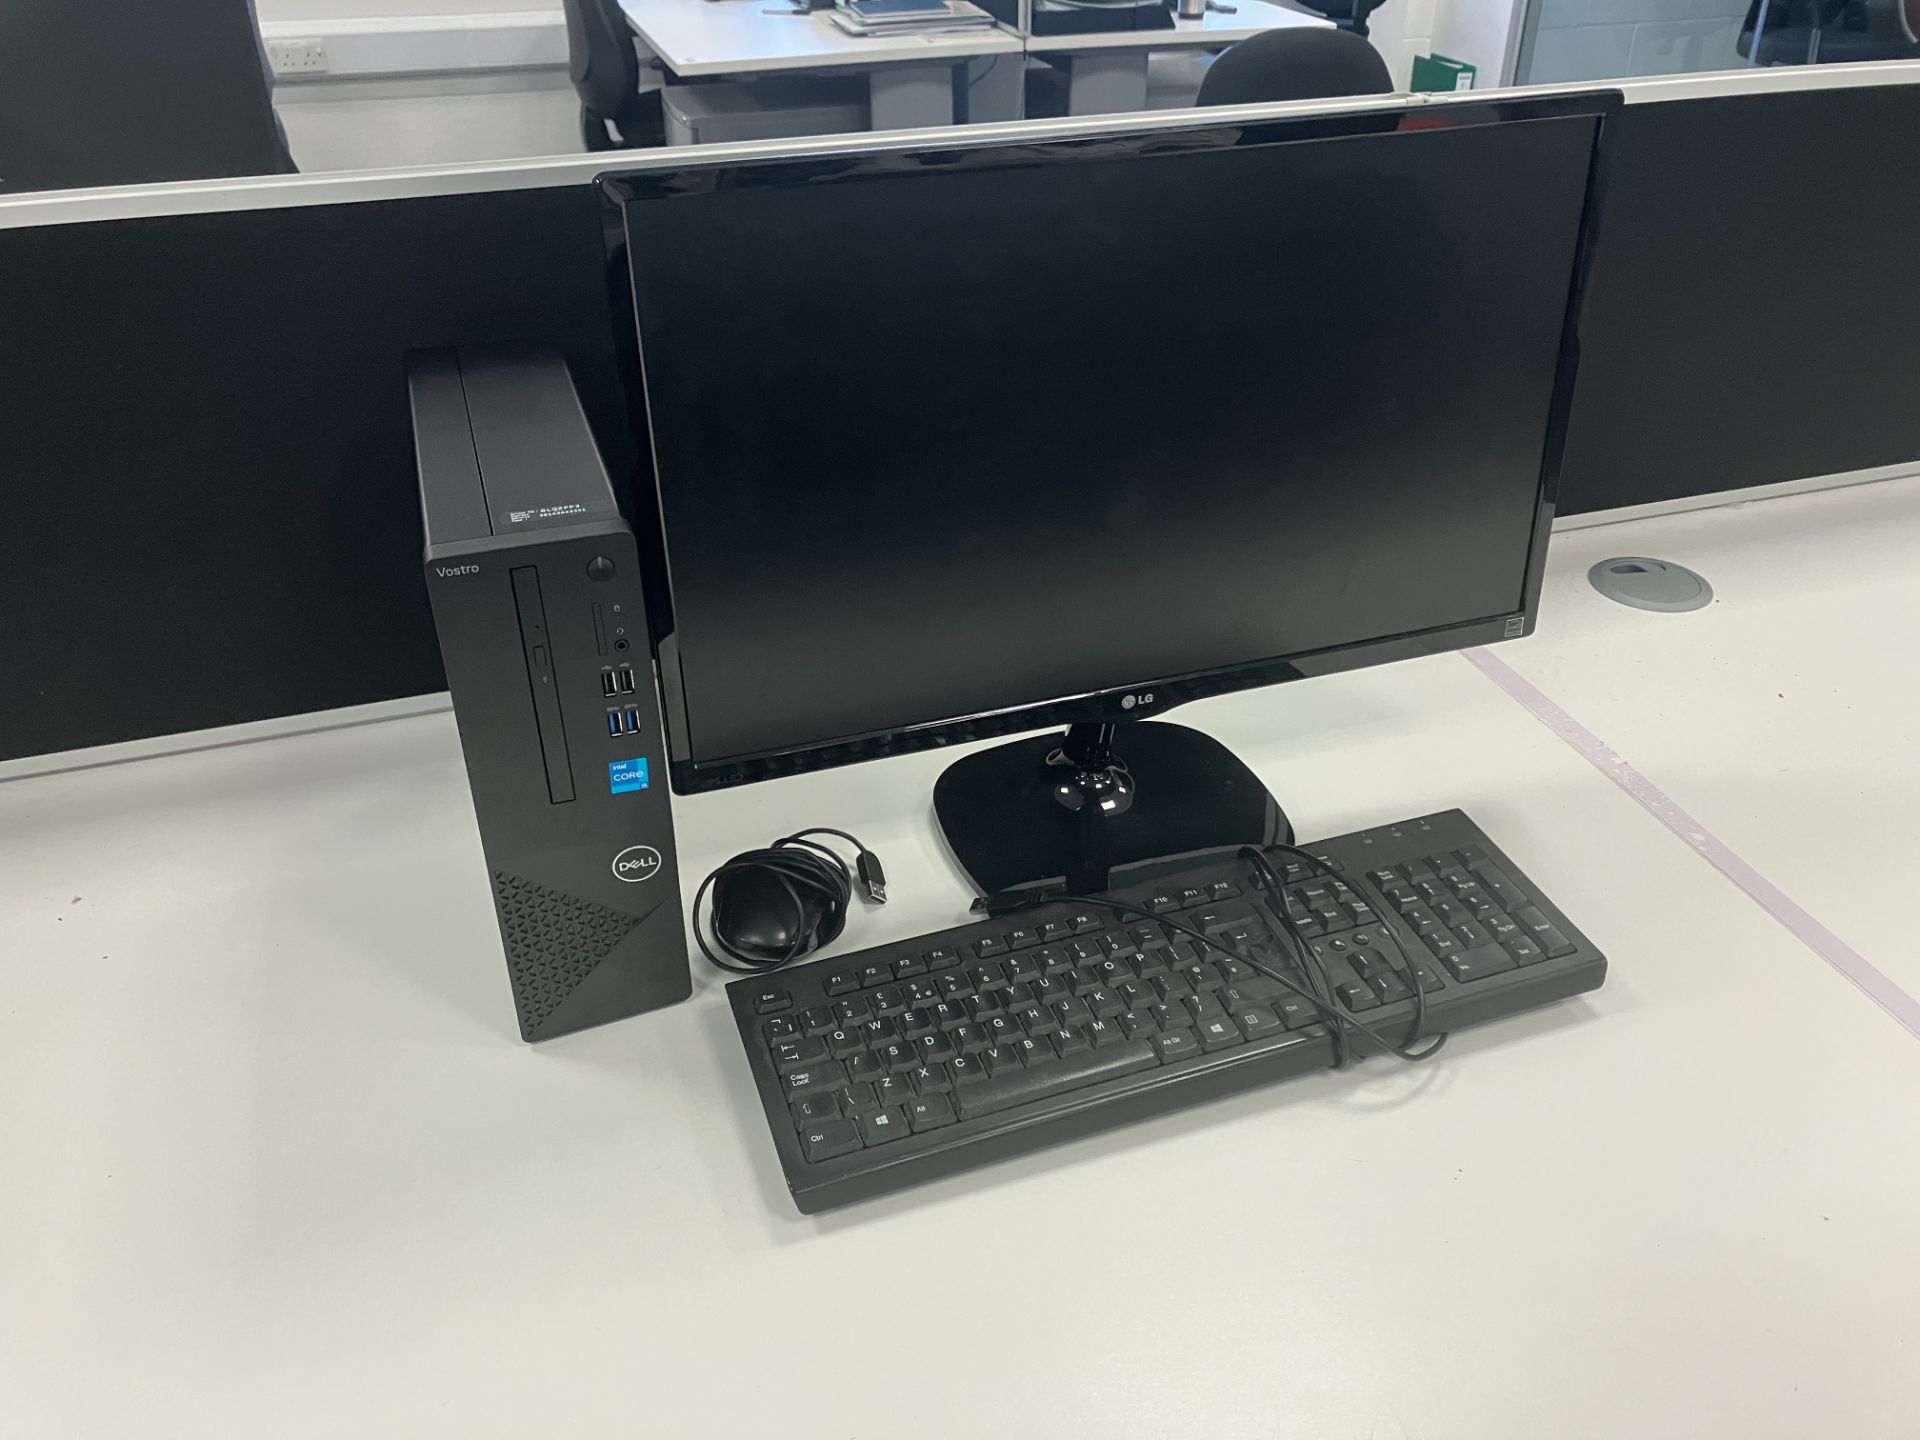 Dell Vostro Core i5 personal computer with LG 23" monitor, keyboard and mouse